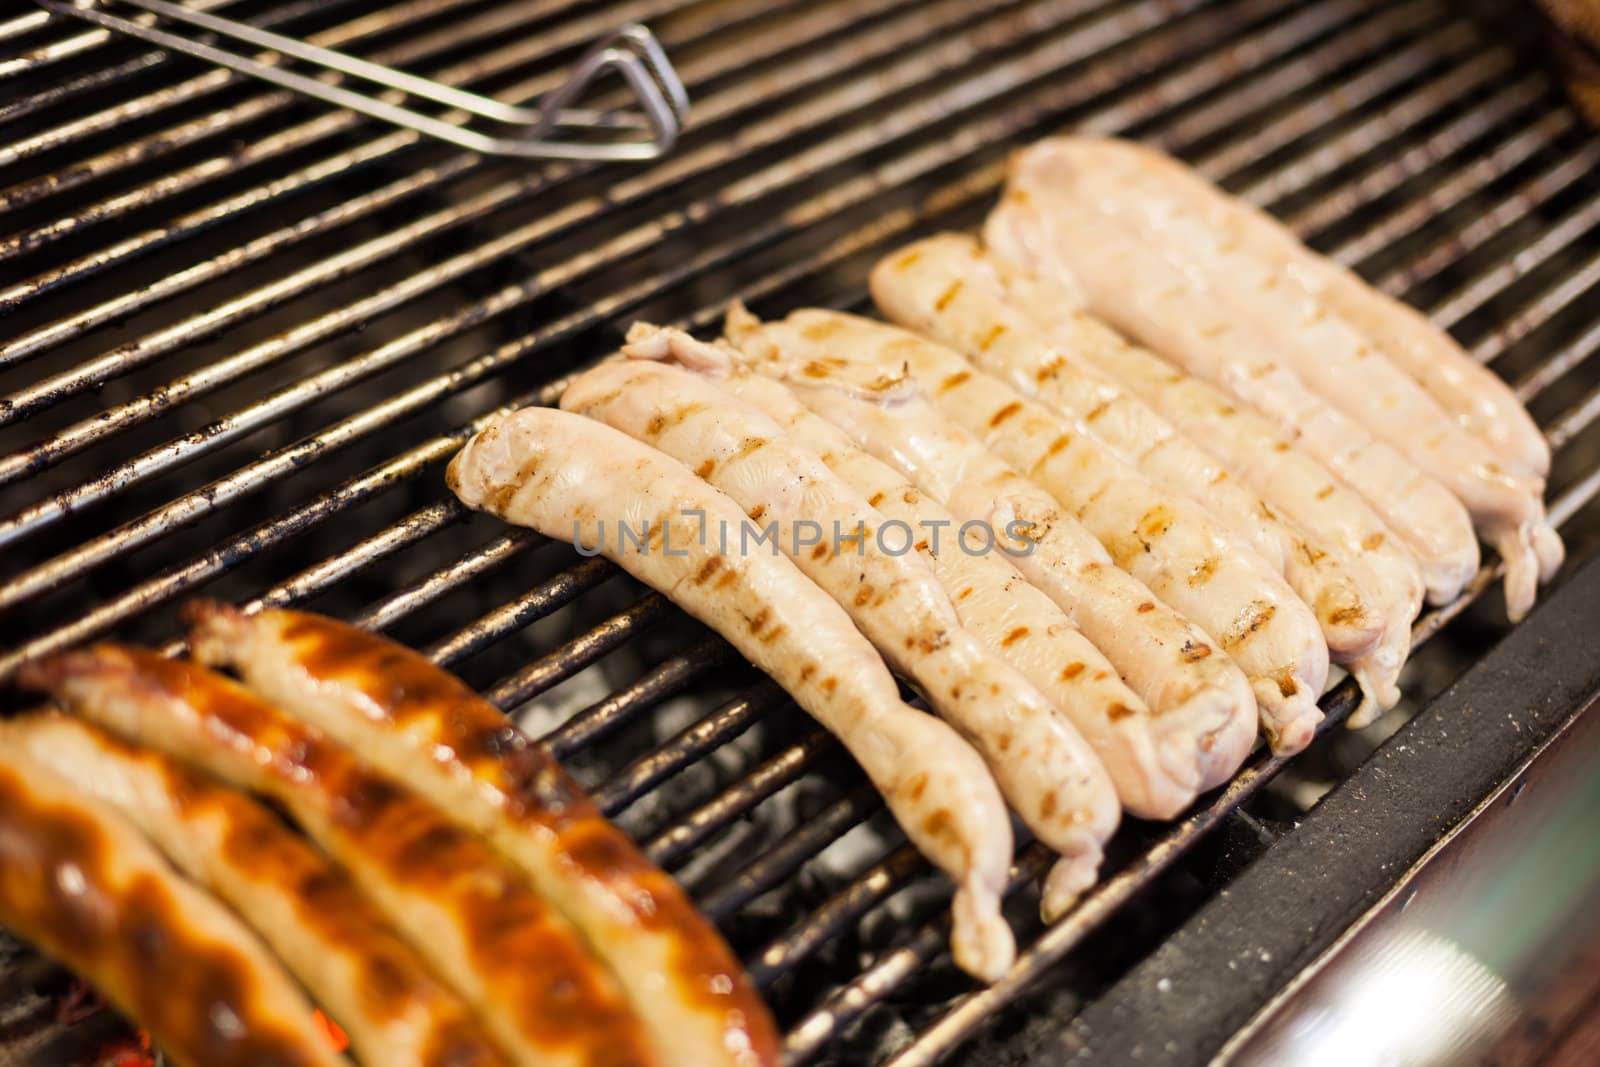 Sausages on the grill by edan